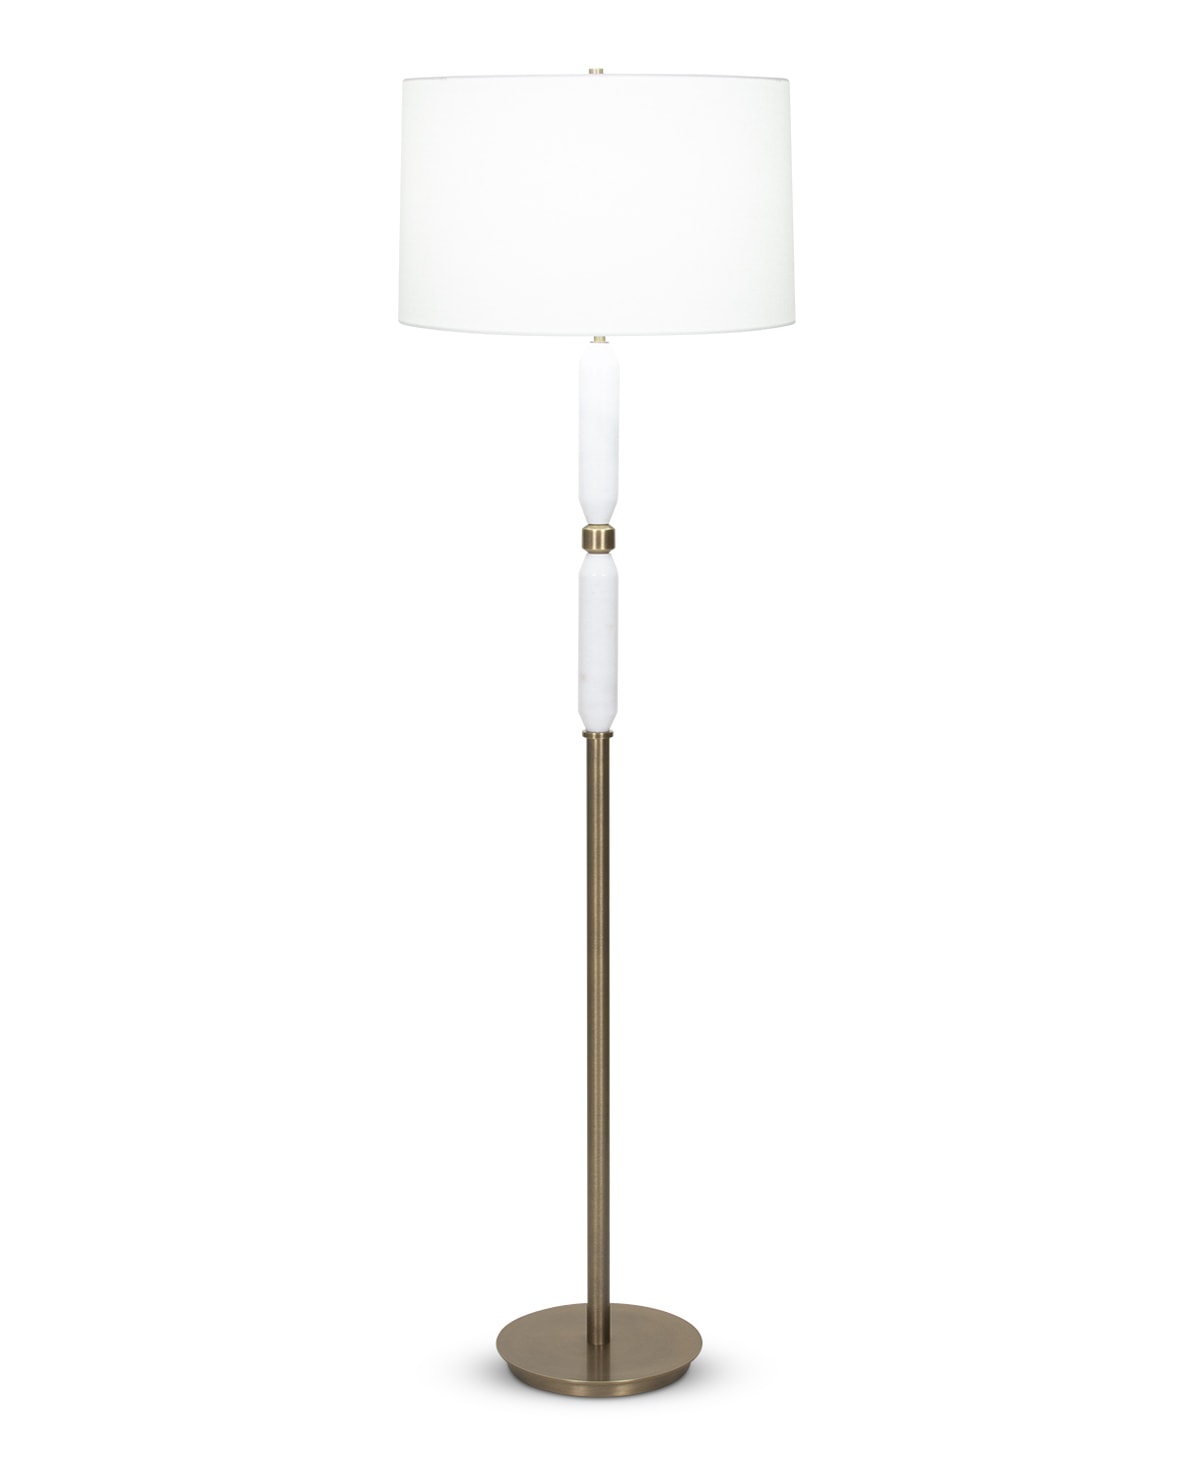 FlowDecor Ness Floor Lamp in white marble and metal with antique brass finish and off-white linen tapered drum shade (# 4089)